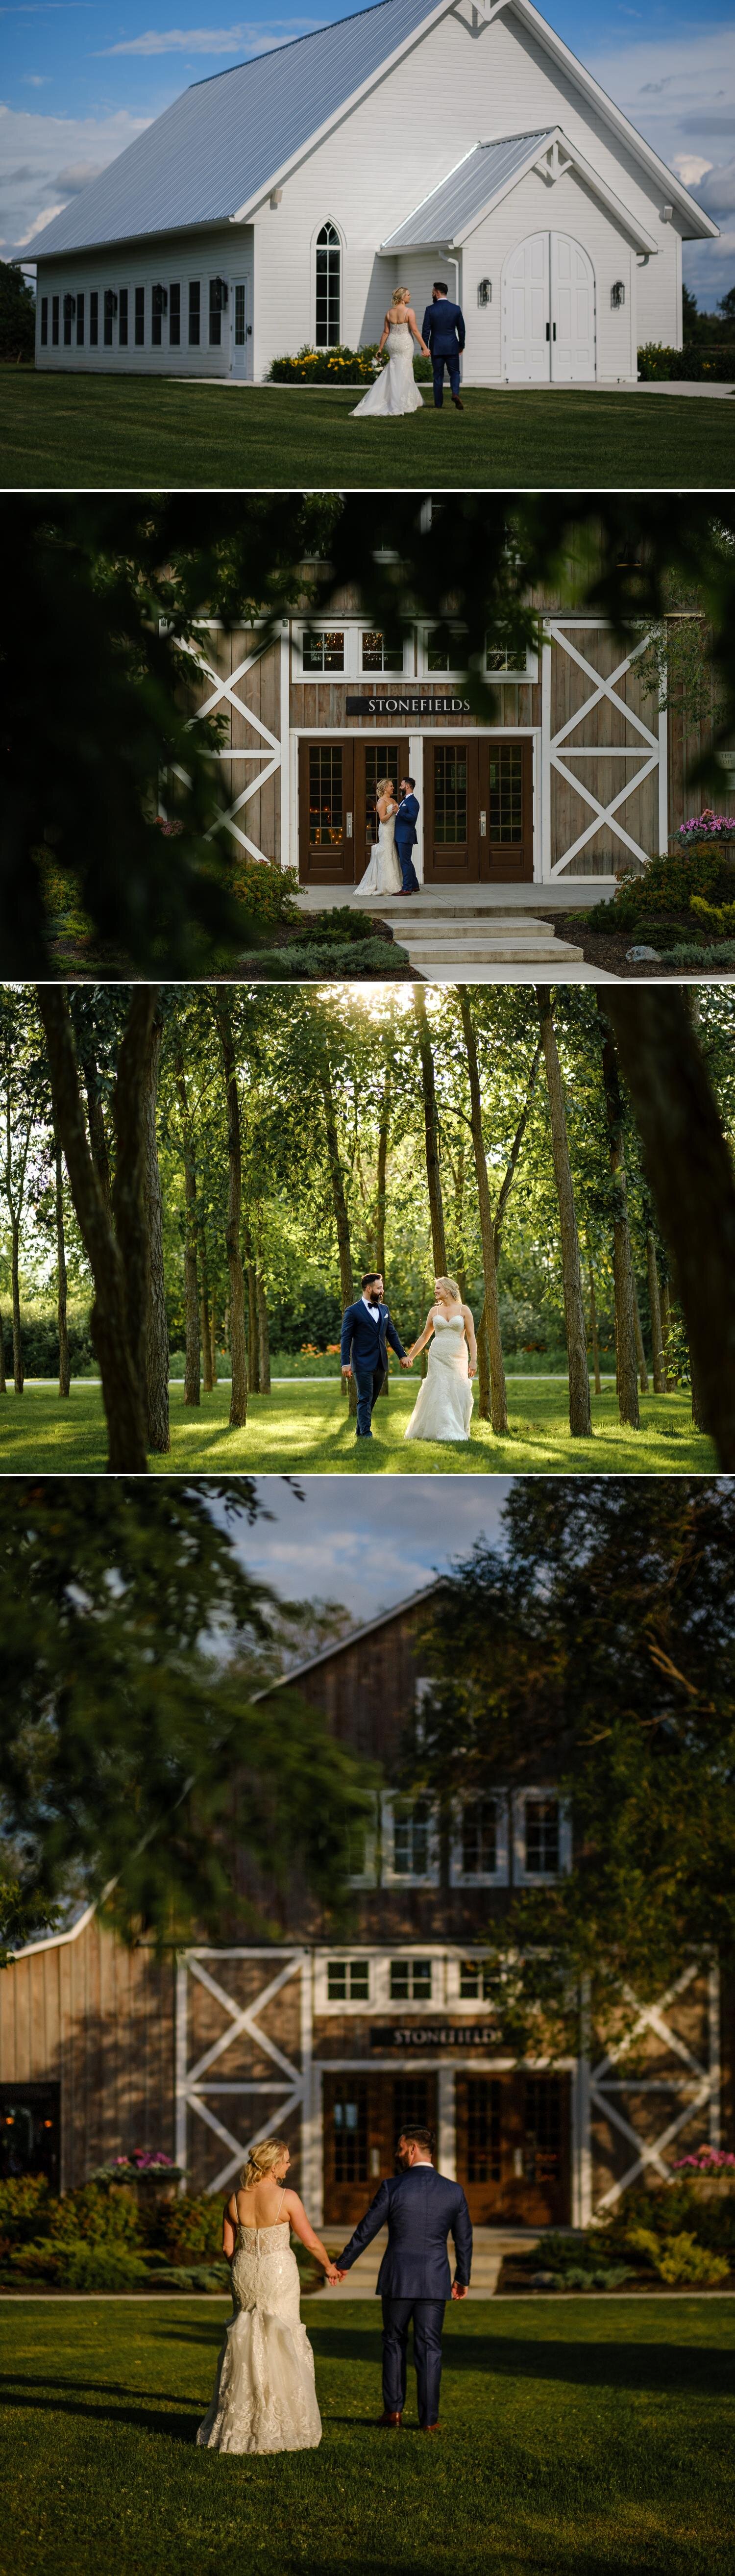 couples portraits in natural light at a stonefields estate wedding